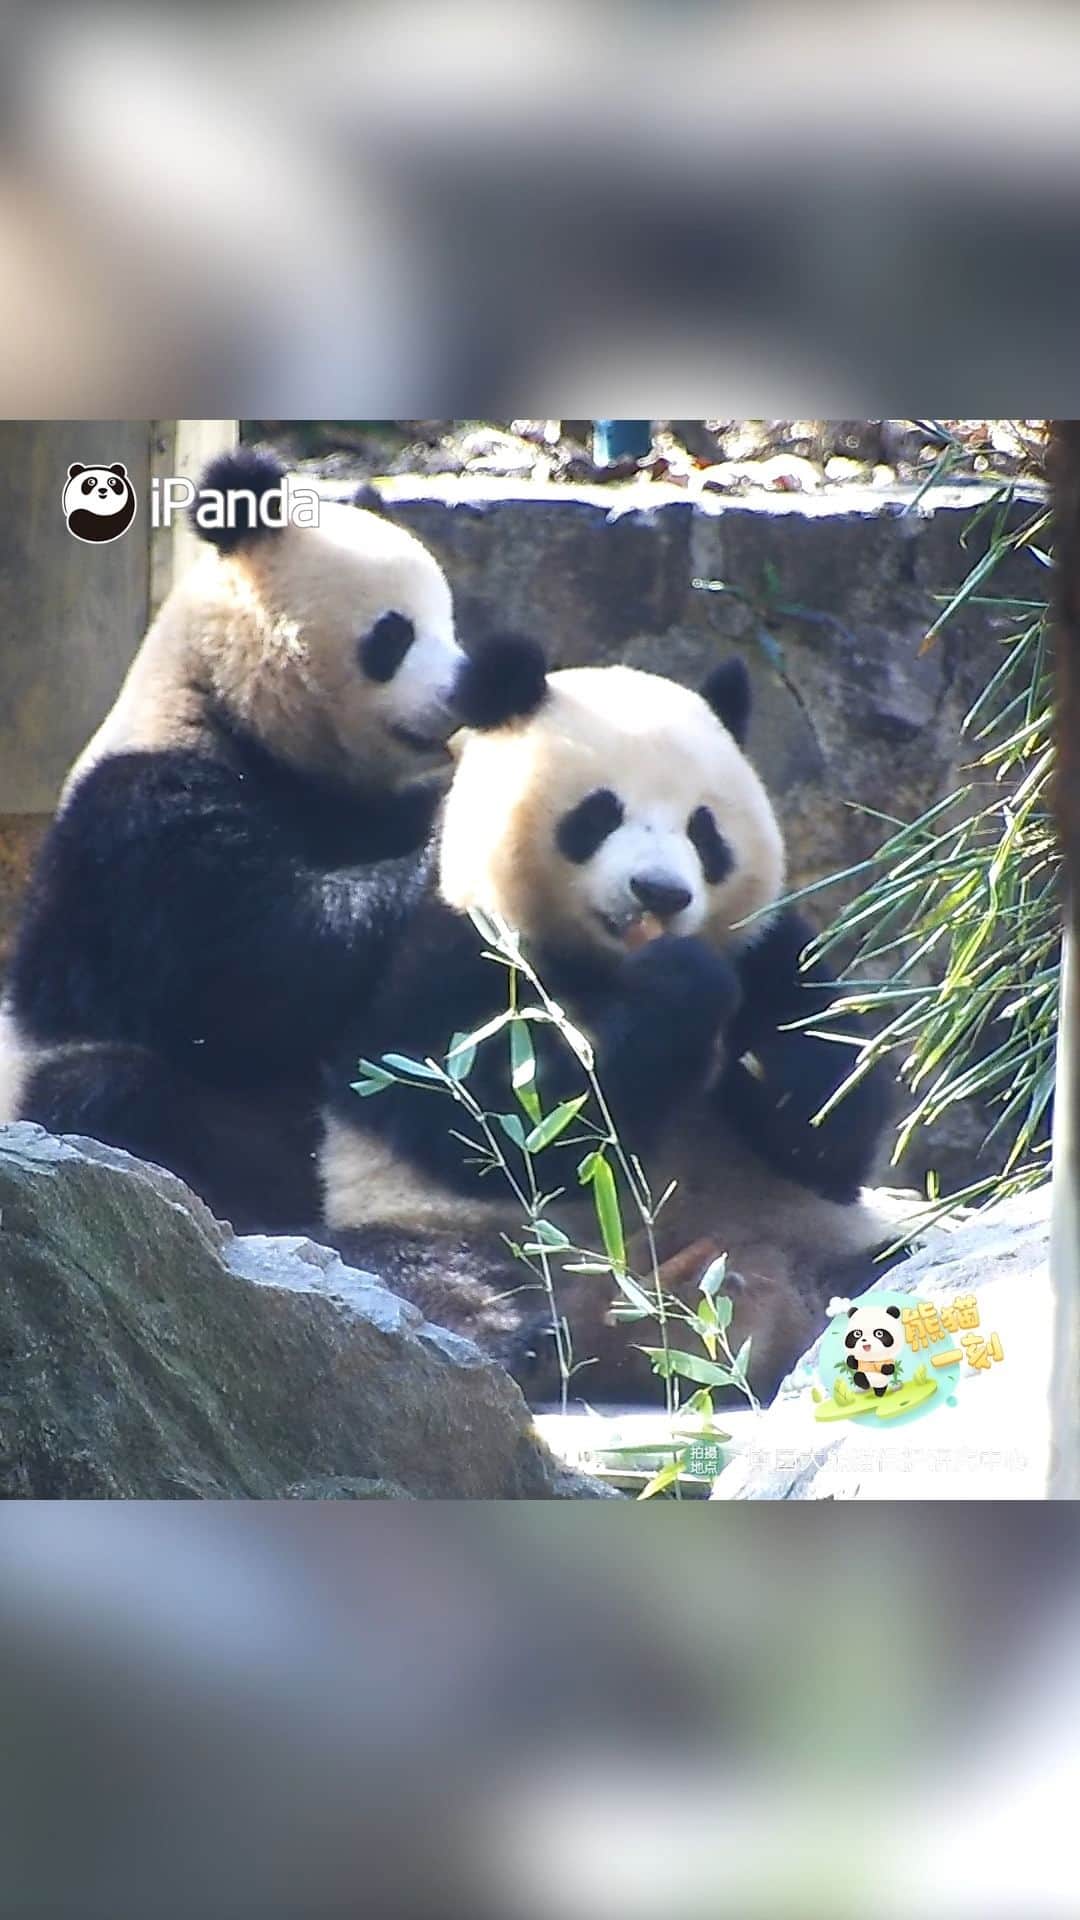 iPandaのインスタグラム：「This new restaurant not only has delicious bamboo but also offers free massage. (Qing Hua & Qing Lu) 🐼 🐼 🐼 #Panda #iPanda #Cute #HiPanda #CCRCGP #PandaMoment  For more panda information, please check out: https://en.ipanda.com」